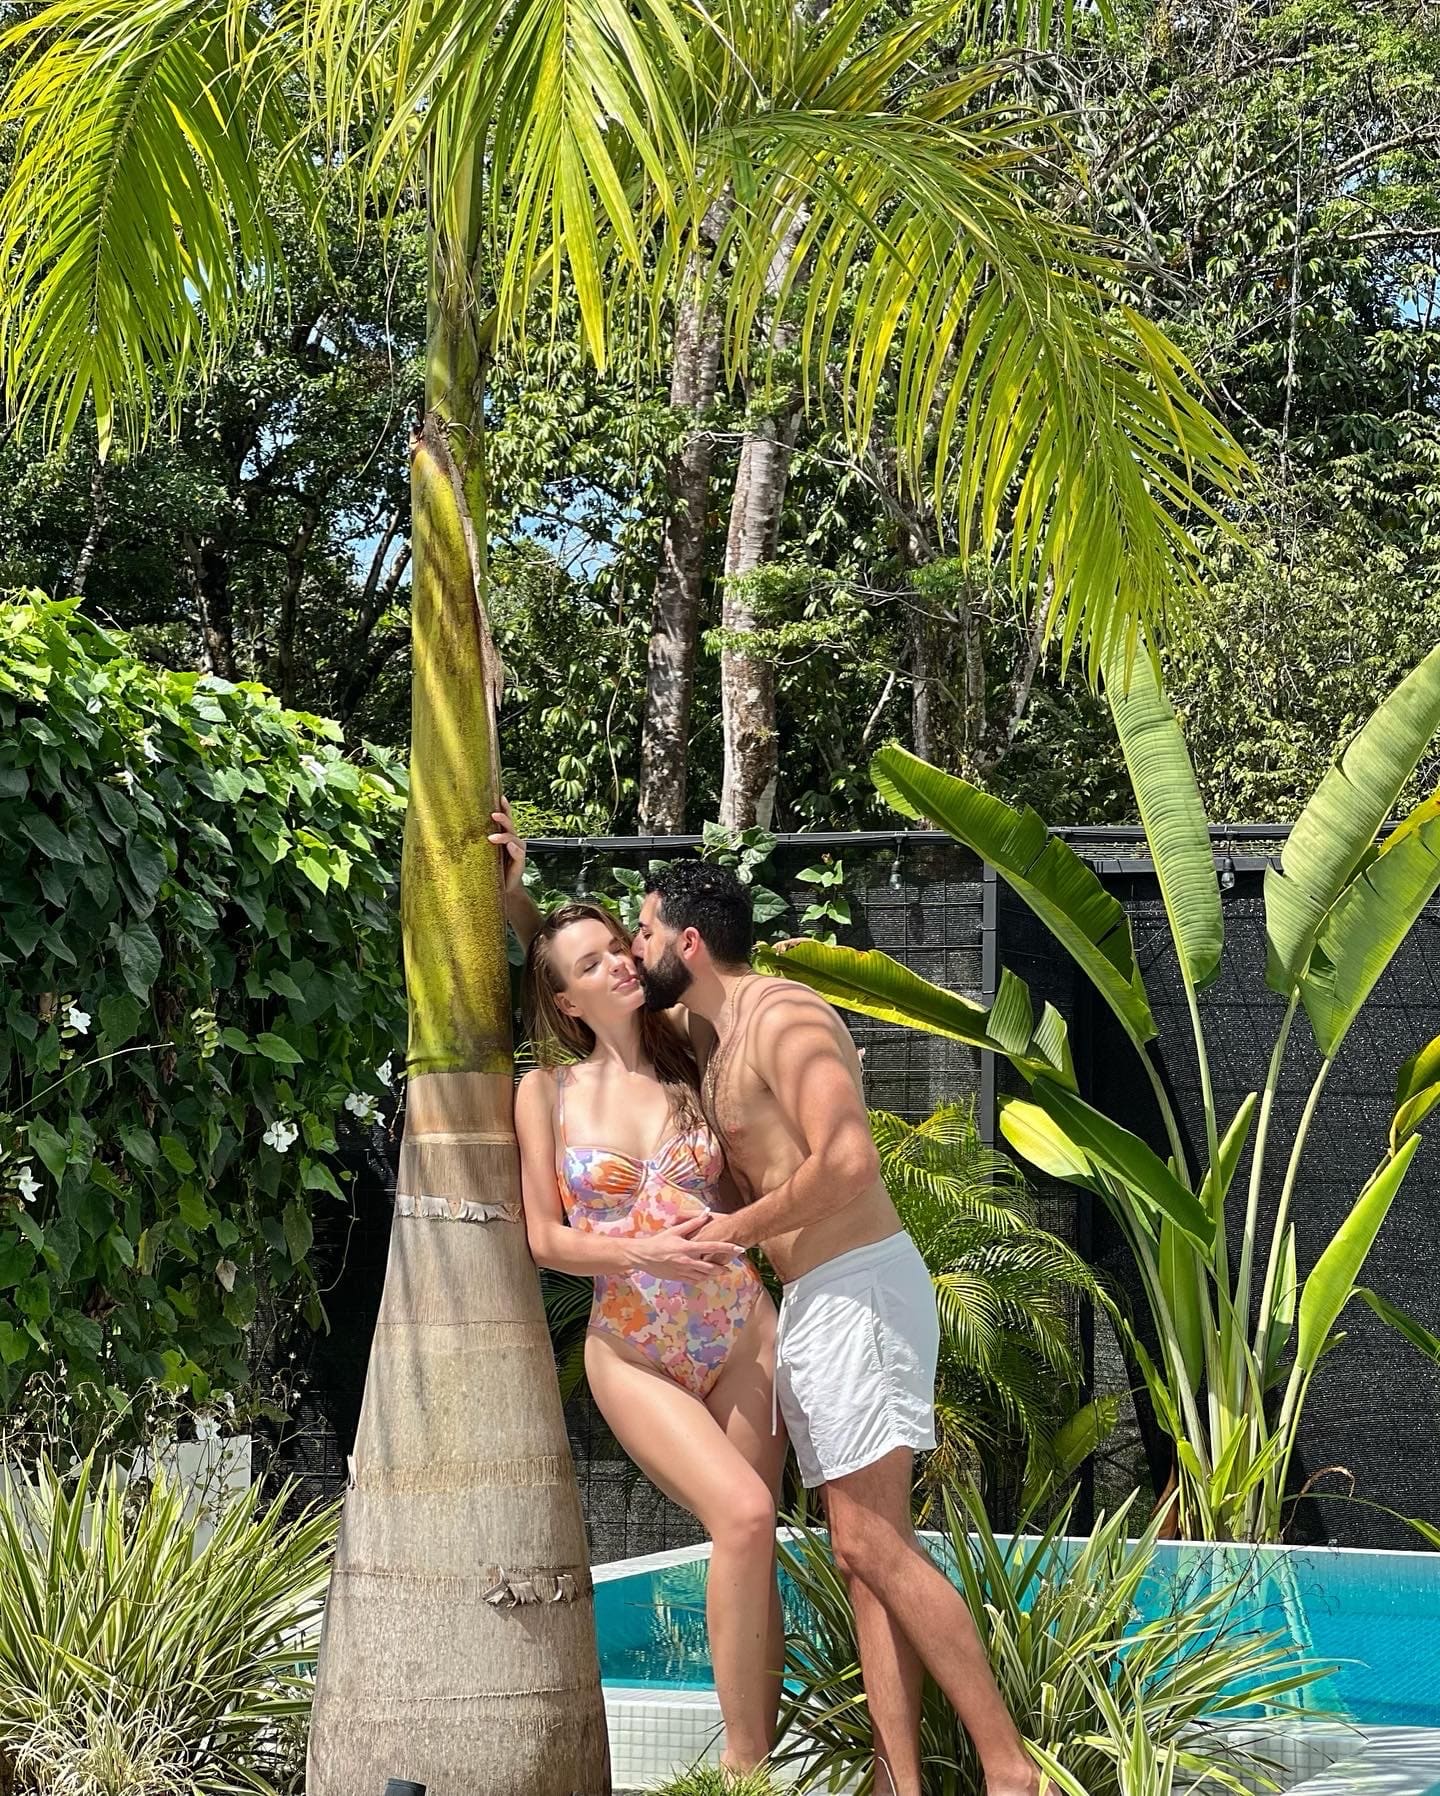 A couple enjoying a romantic moment by the pool at Vayu Retreat Villas, the ultimate honeymoon boutique hotel in Costa Rica, surrounded by lush tropical greenery.